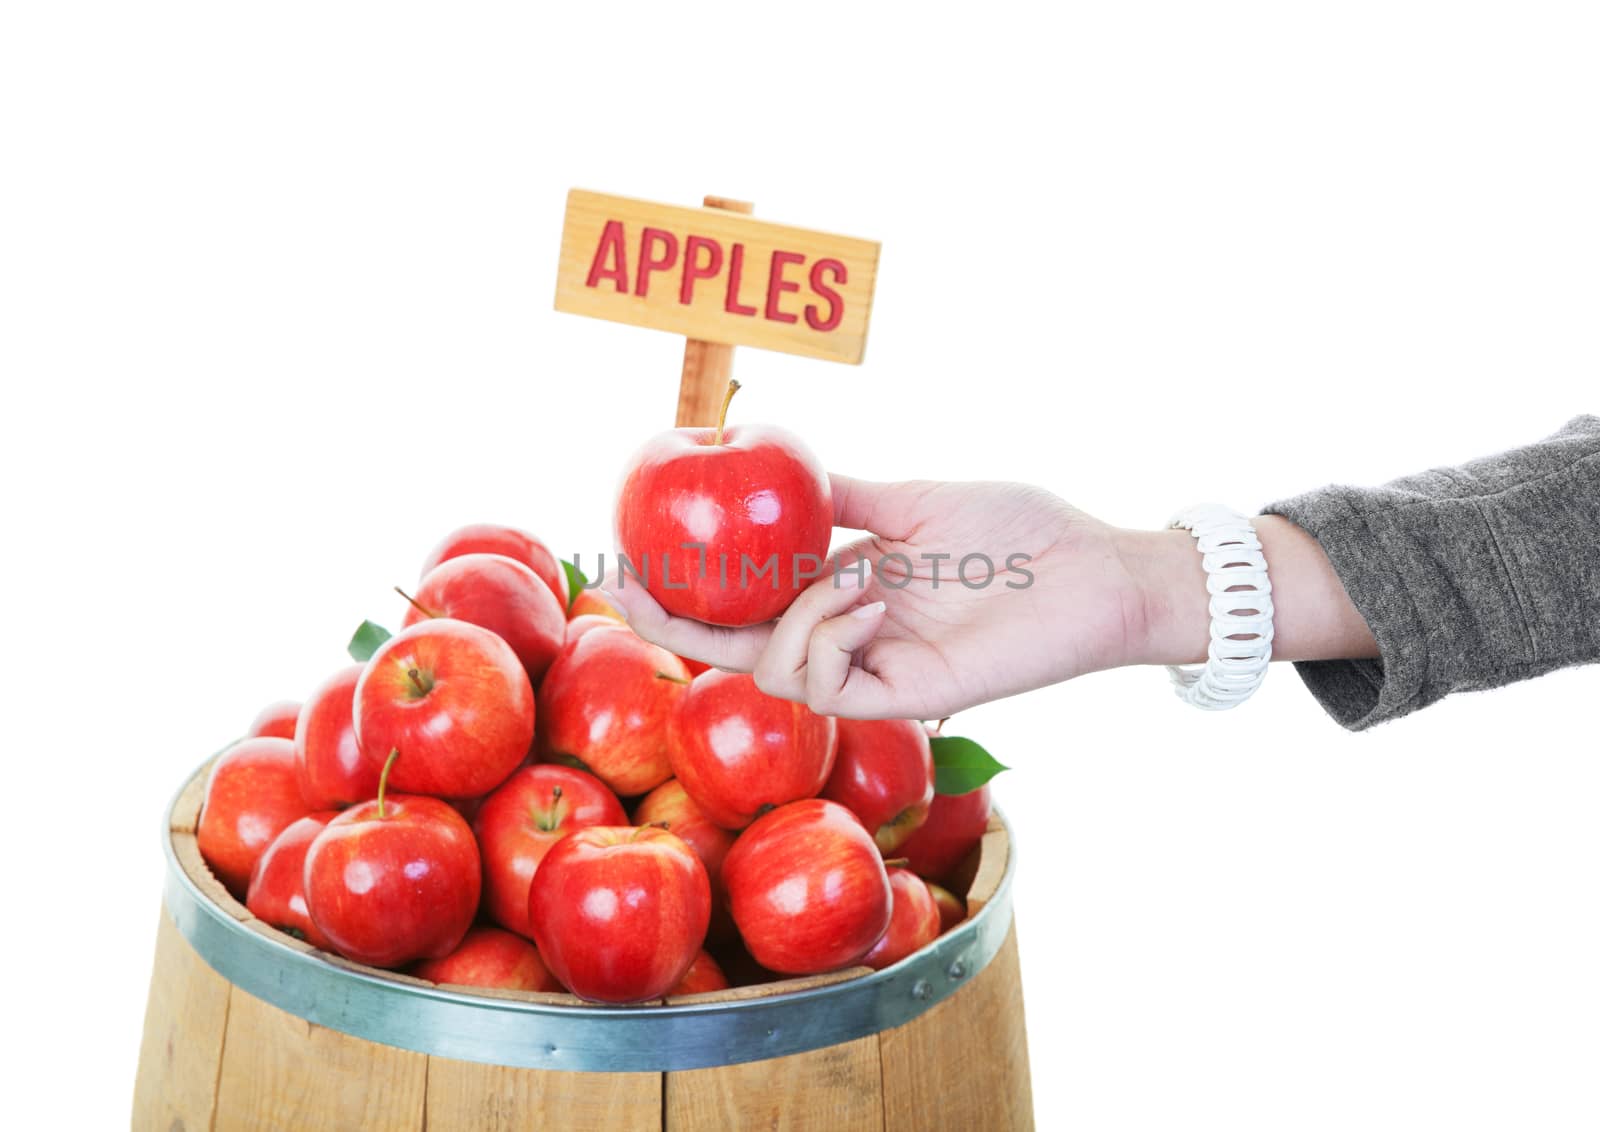 A consumer picking an apple from a market display barrel.  Shot on white background.